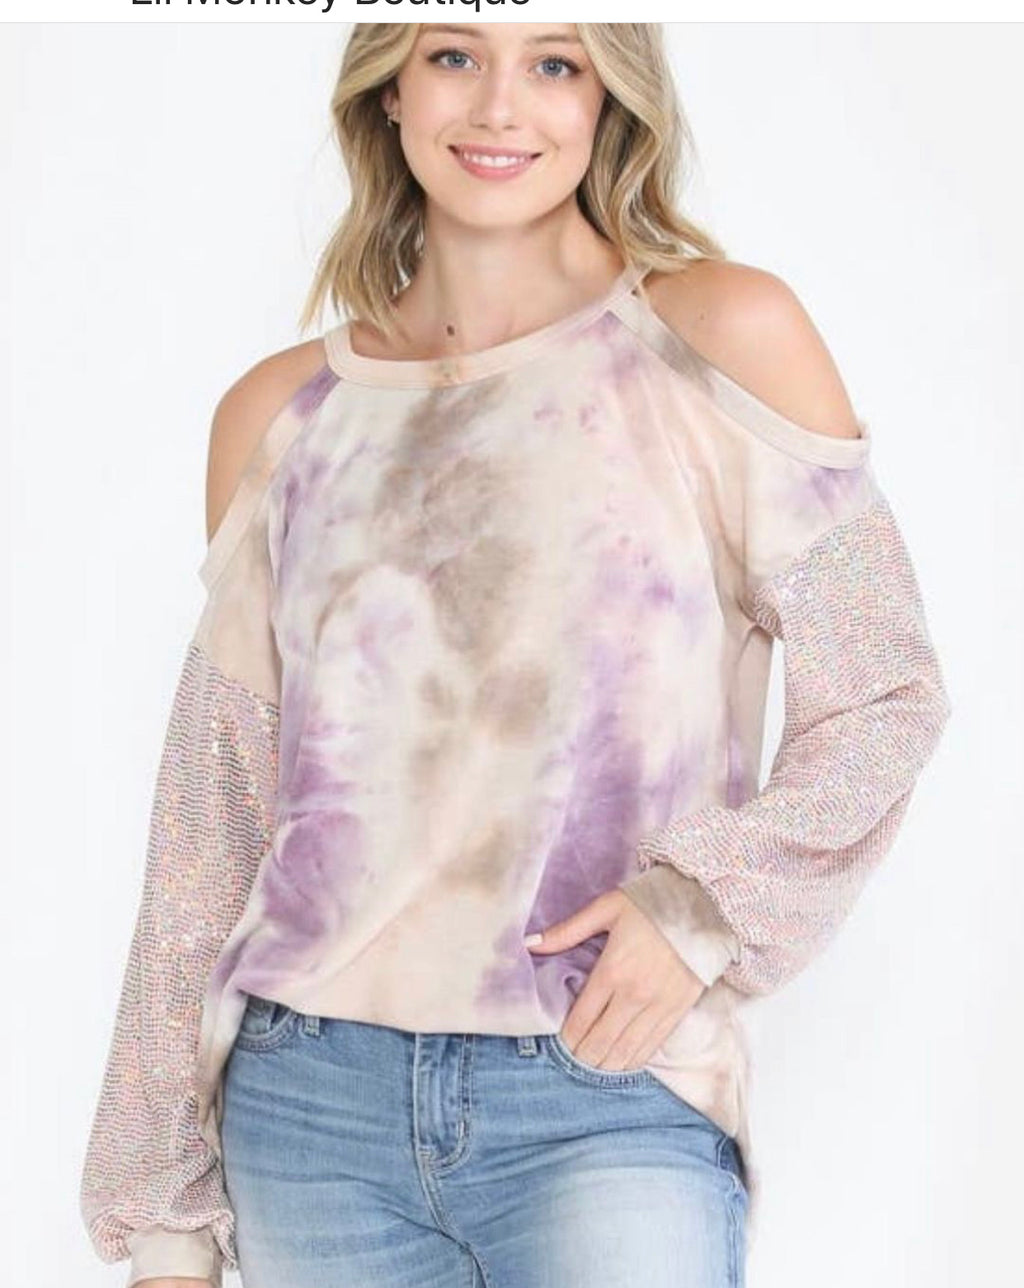 BLUSH TIE DYE OPEN SHOULDER WITH ROSE GOLD BLING SLEEVES - Lil Monkey Boutique